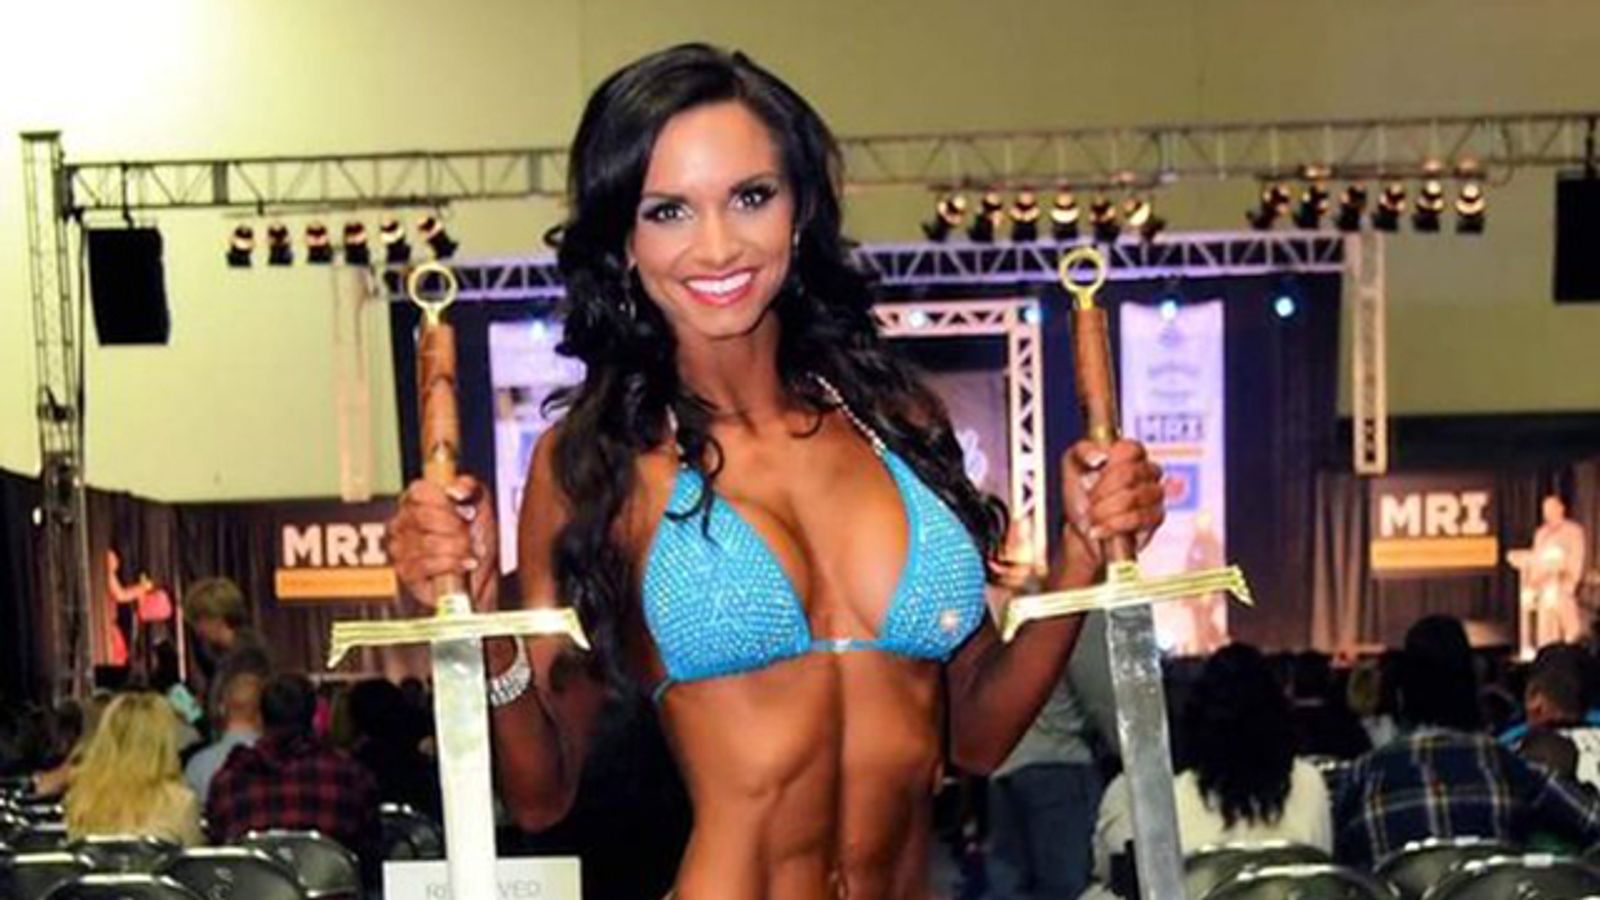 Ashley Sinclair Wins Two Awards in NPC Fitness Contest